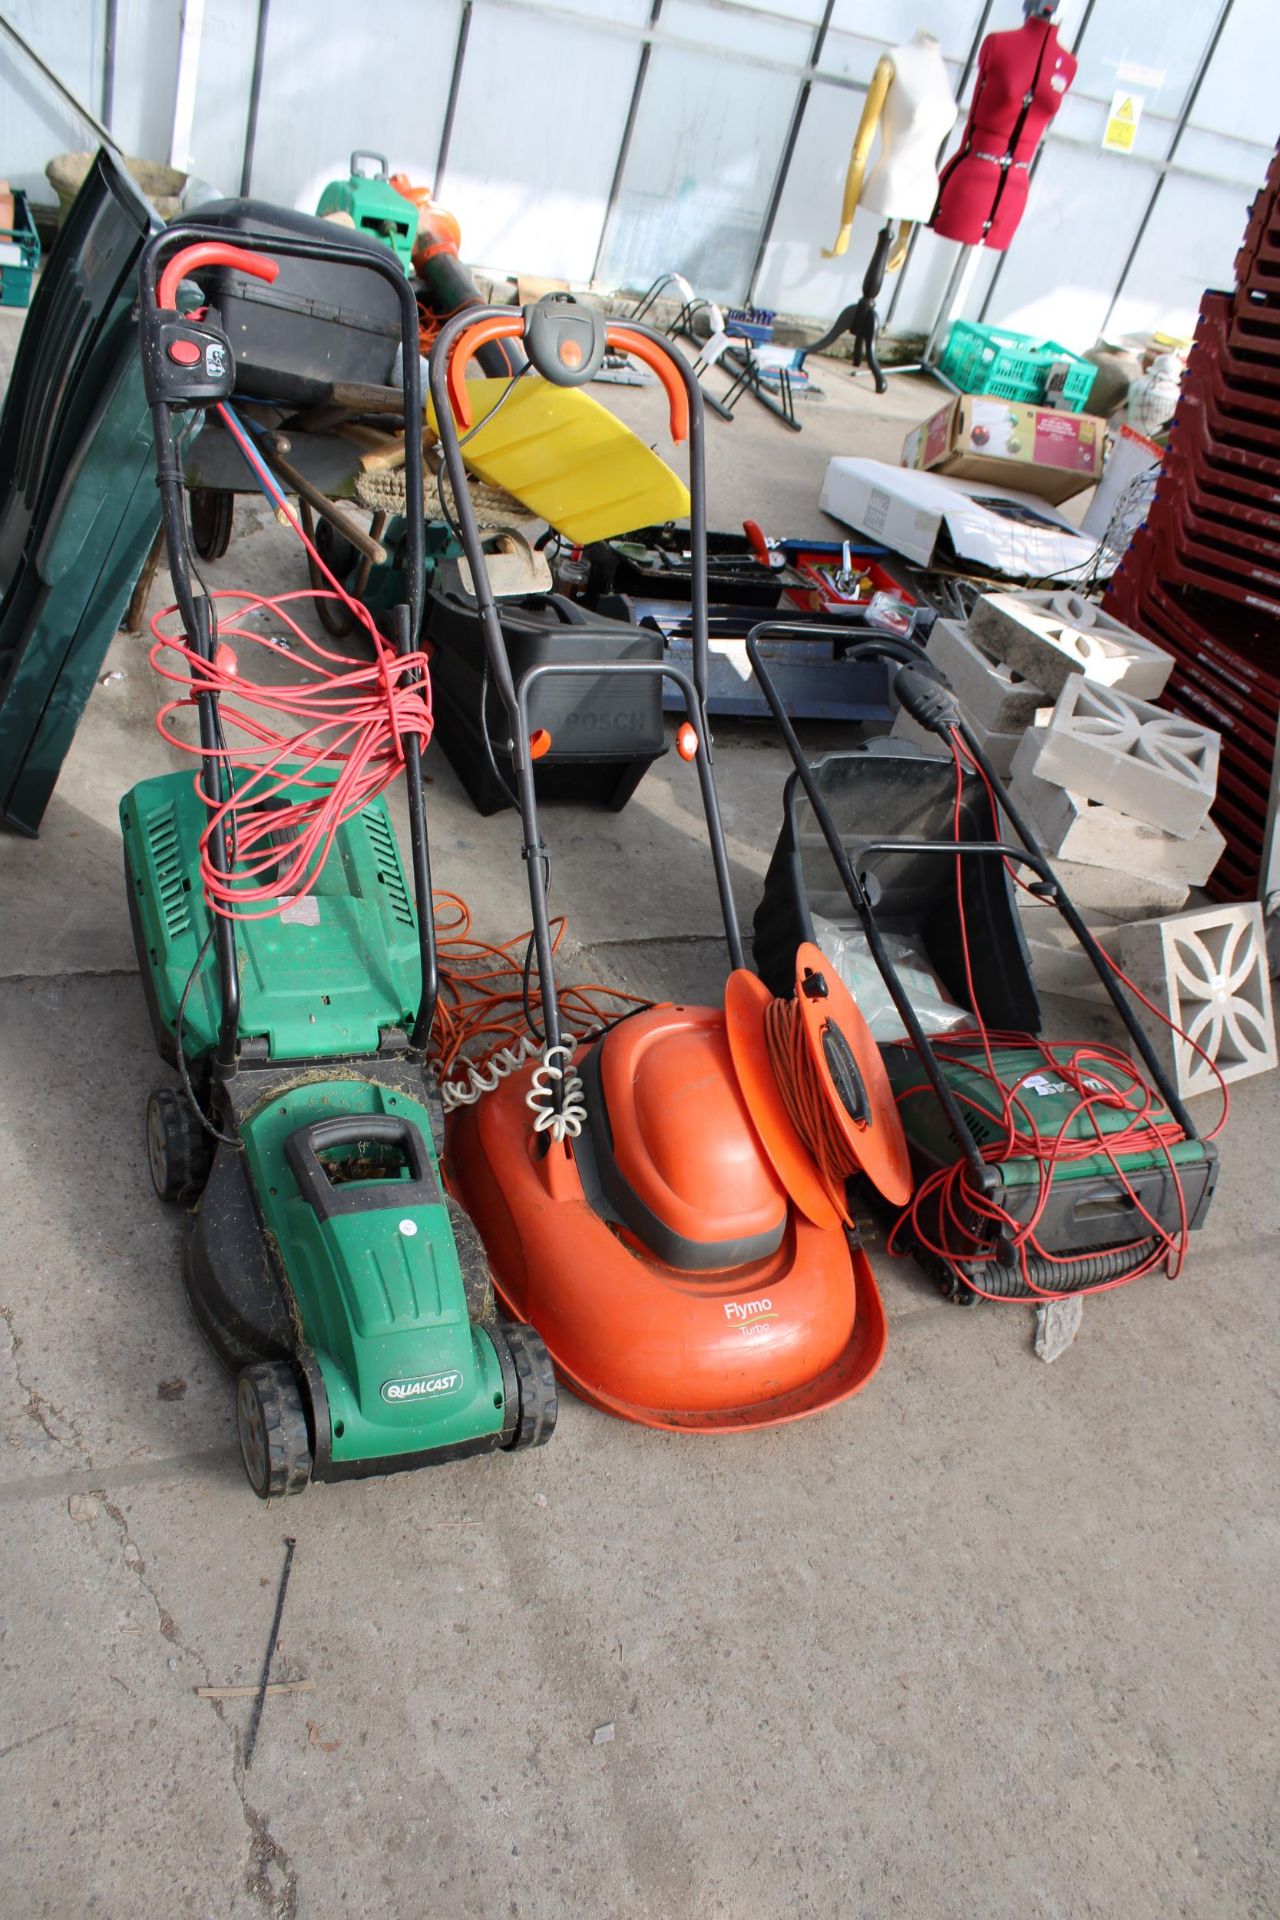 AN ELECTRIC FLYMO, AN ELECTRIC QUALCAST LAWN MOER AND A QUALCAST ELECTRIC LAWN RAKE